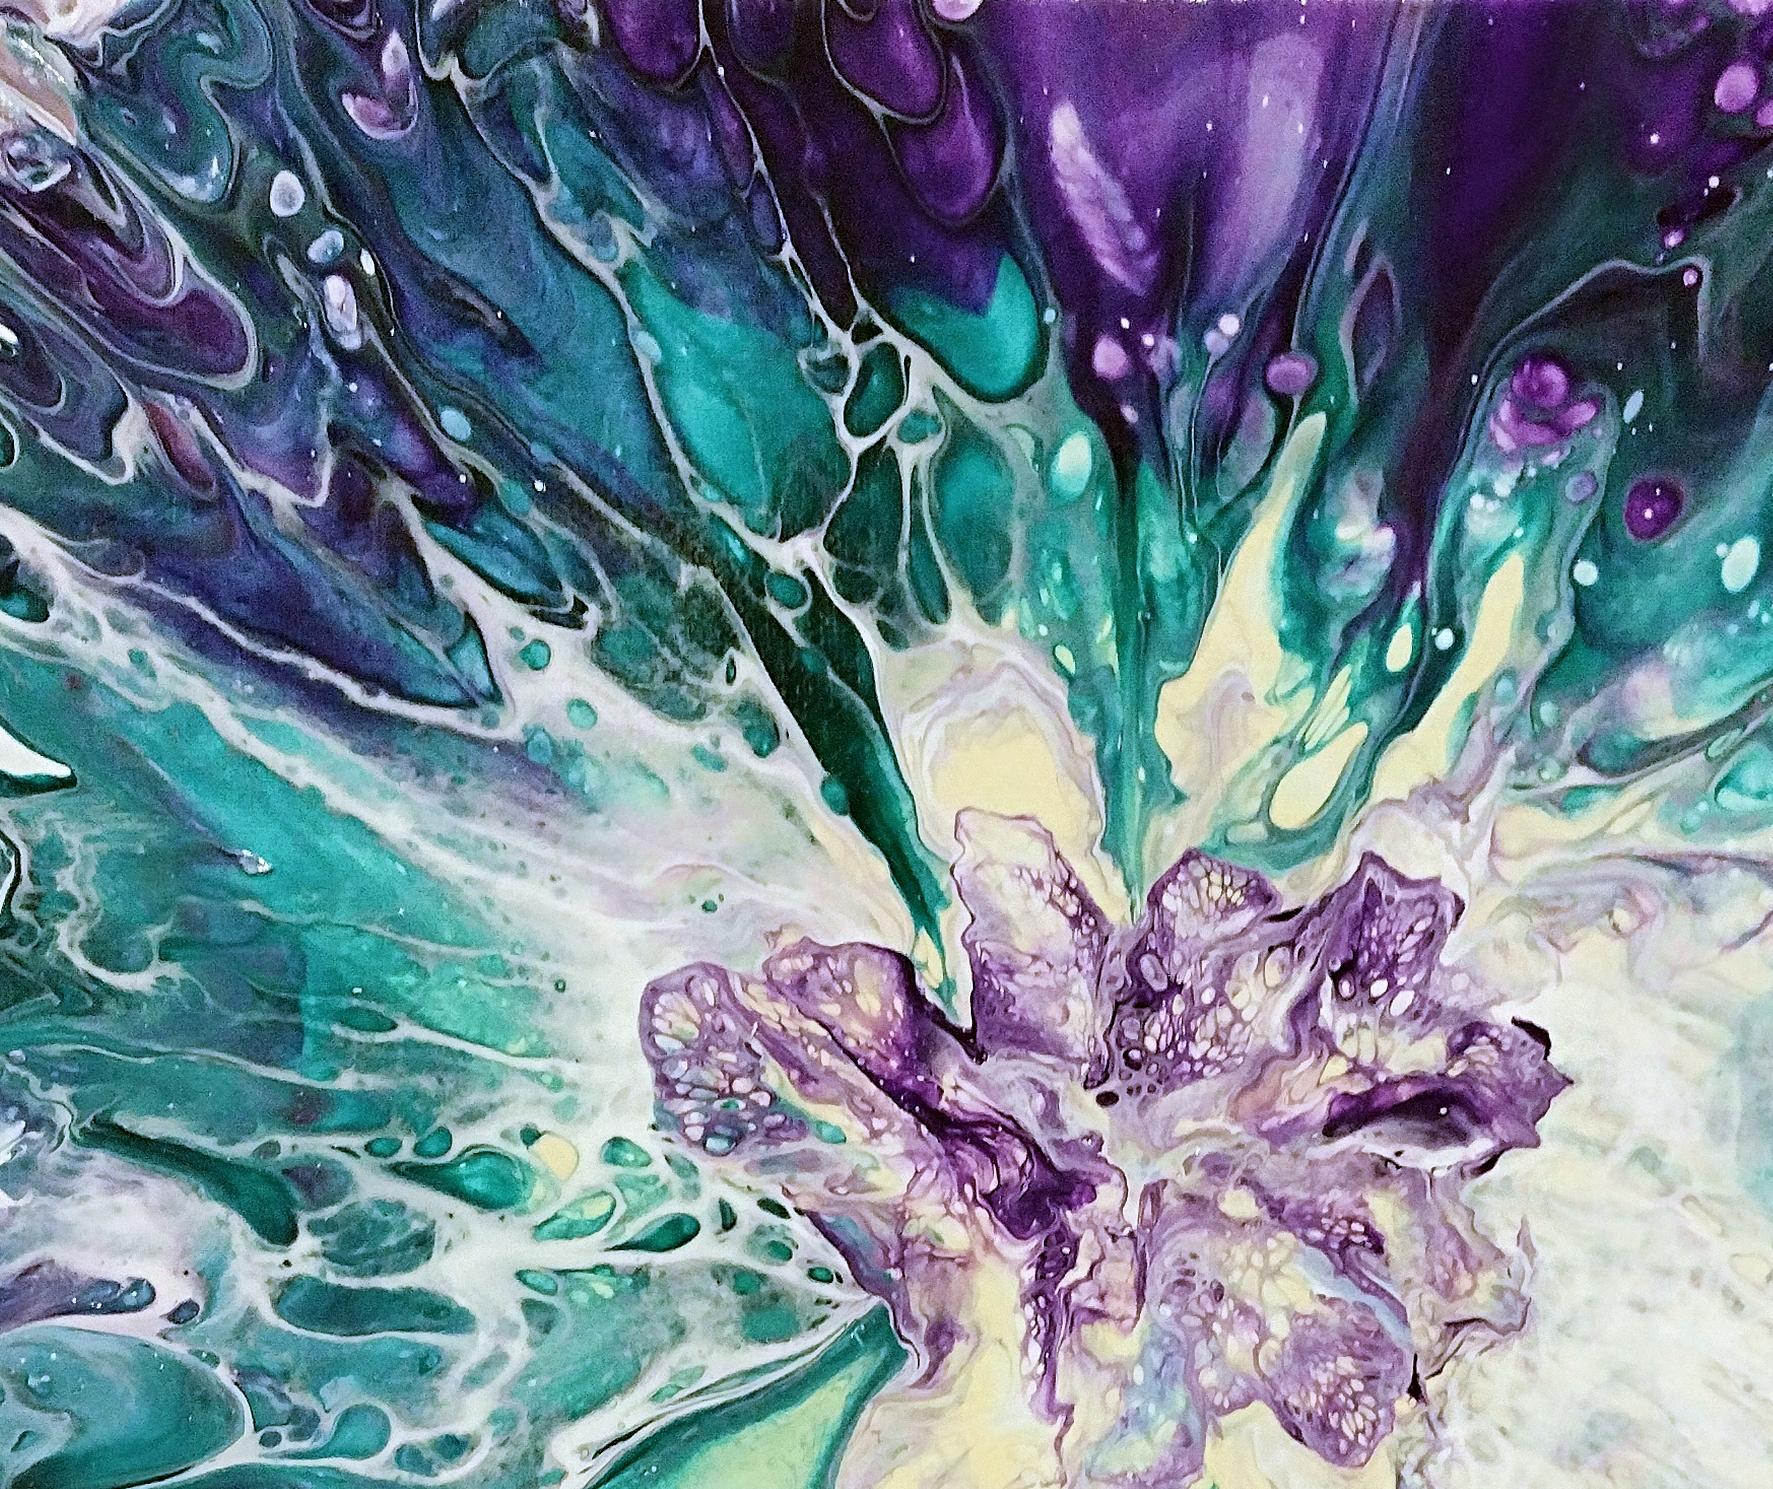 Flower Burst Abstract Acrylic Painting, 12" x 12"